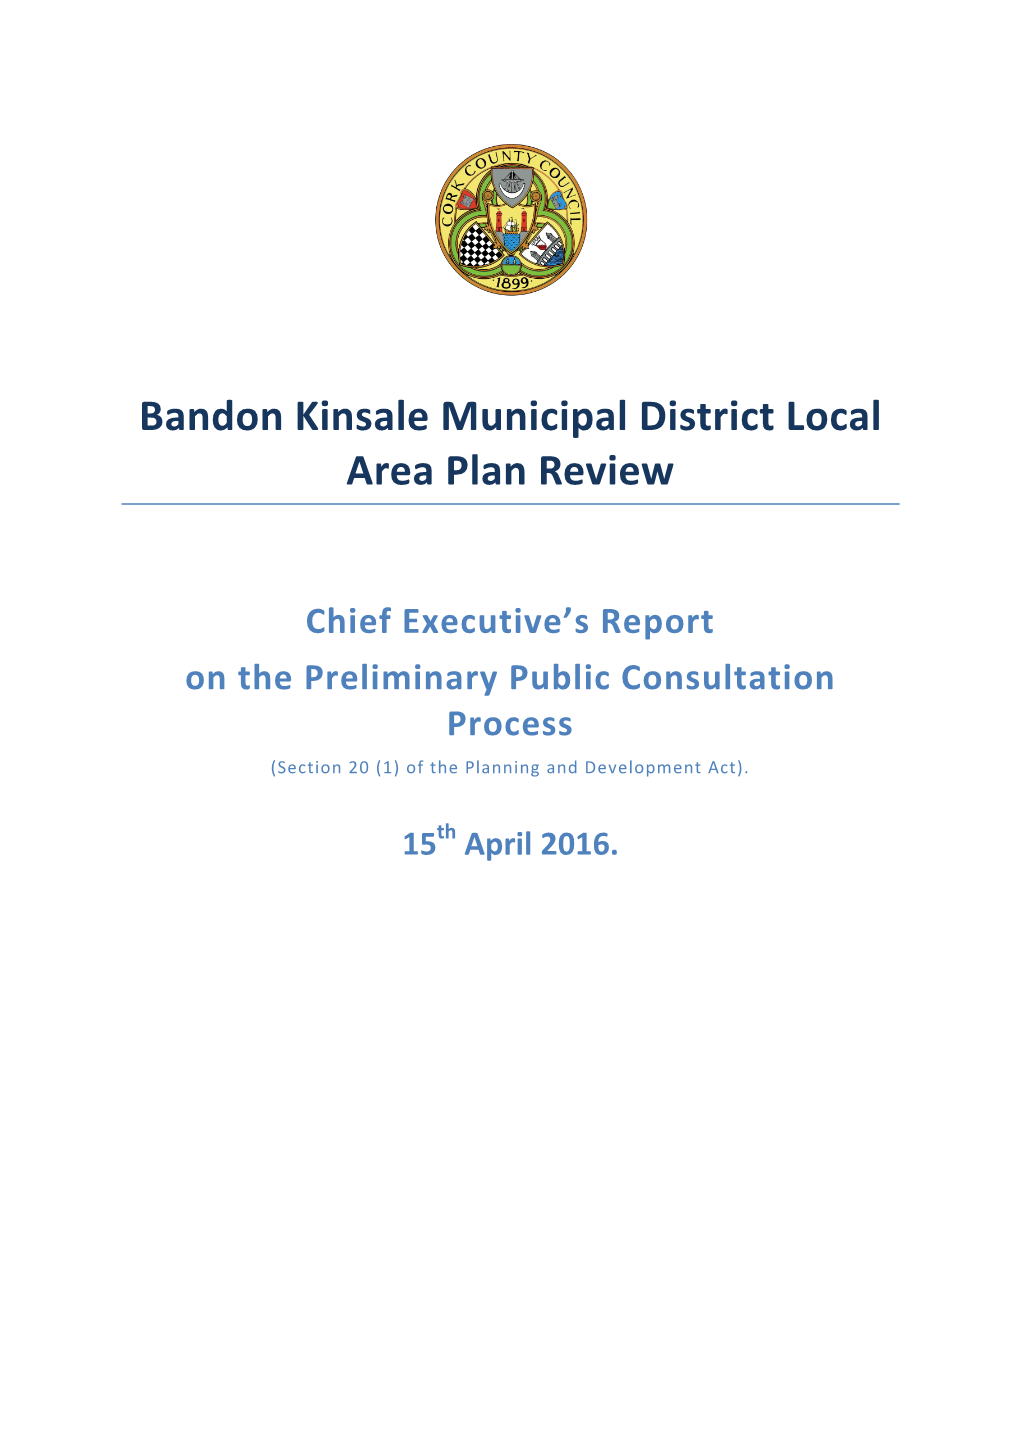 Chief Executive's Report 15-4-16